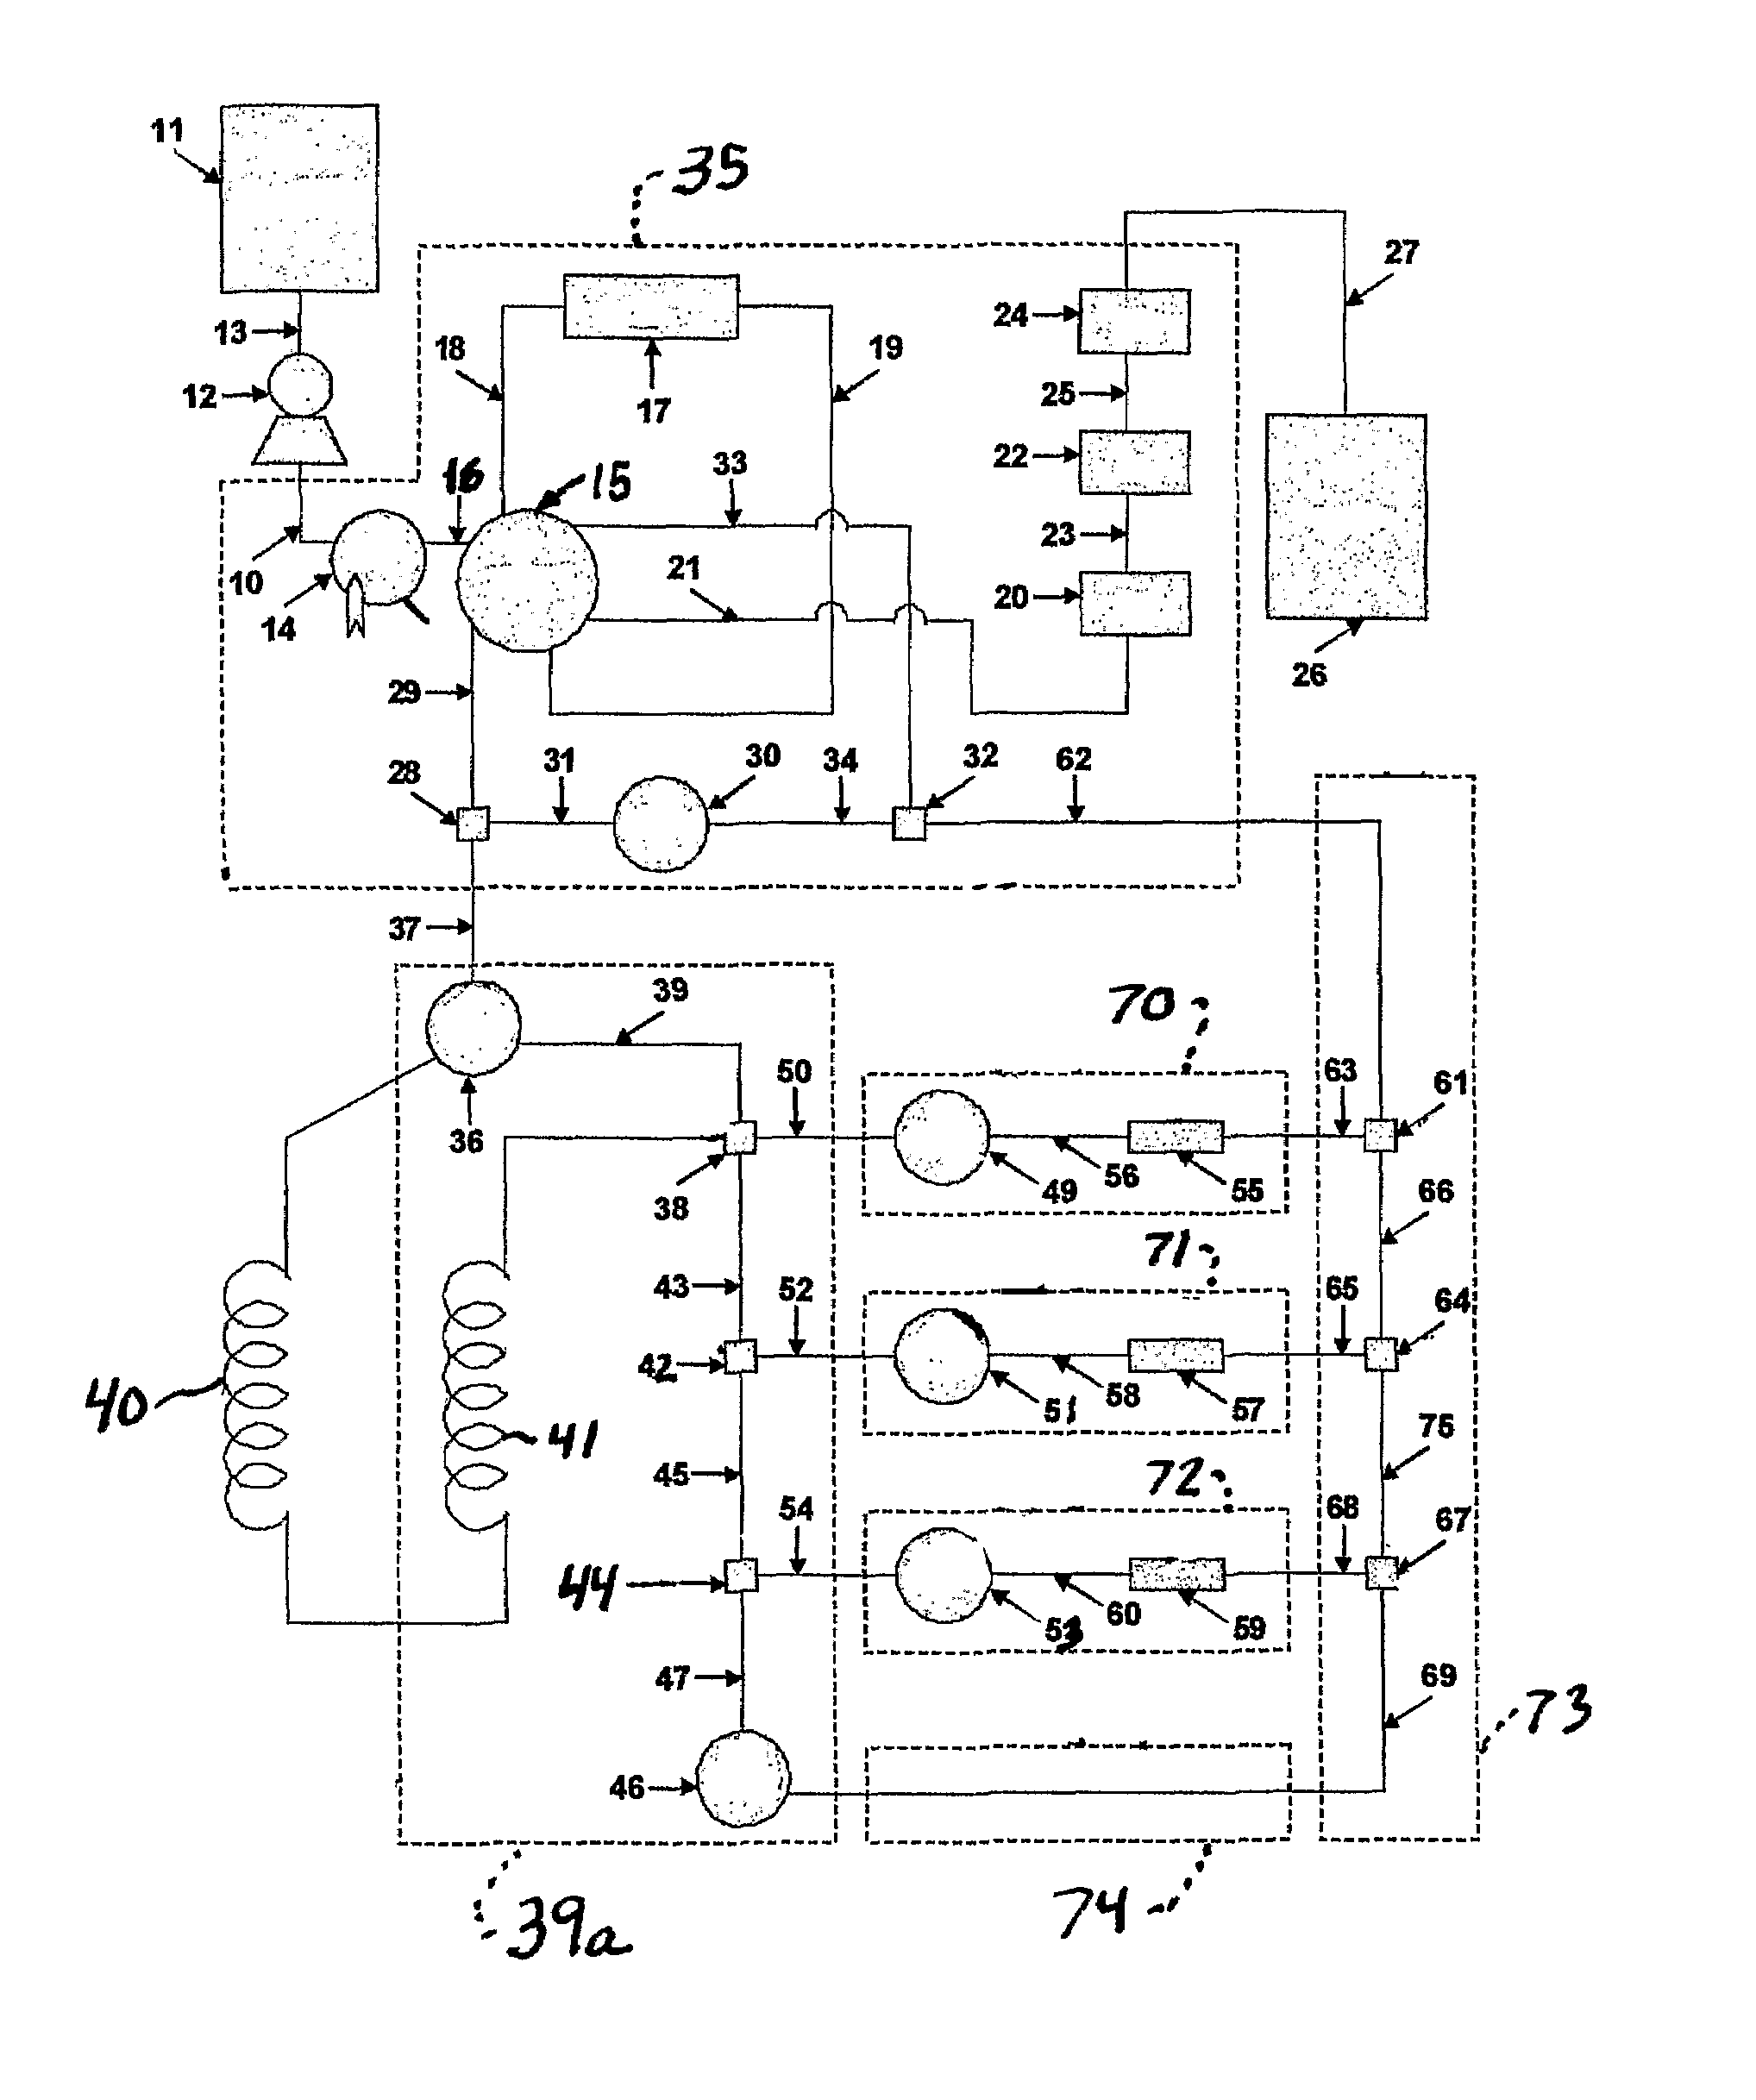 Apparatus and method for polymer characterization